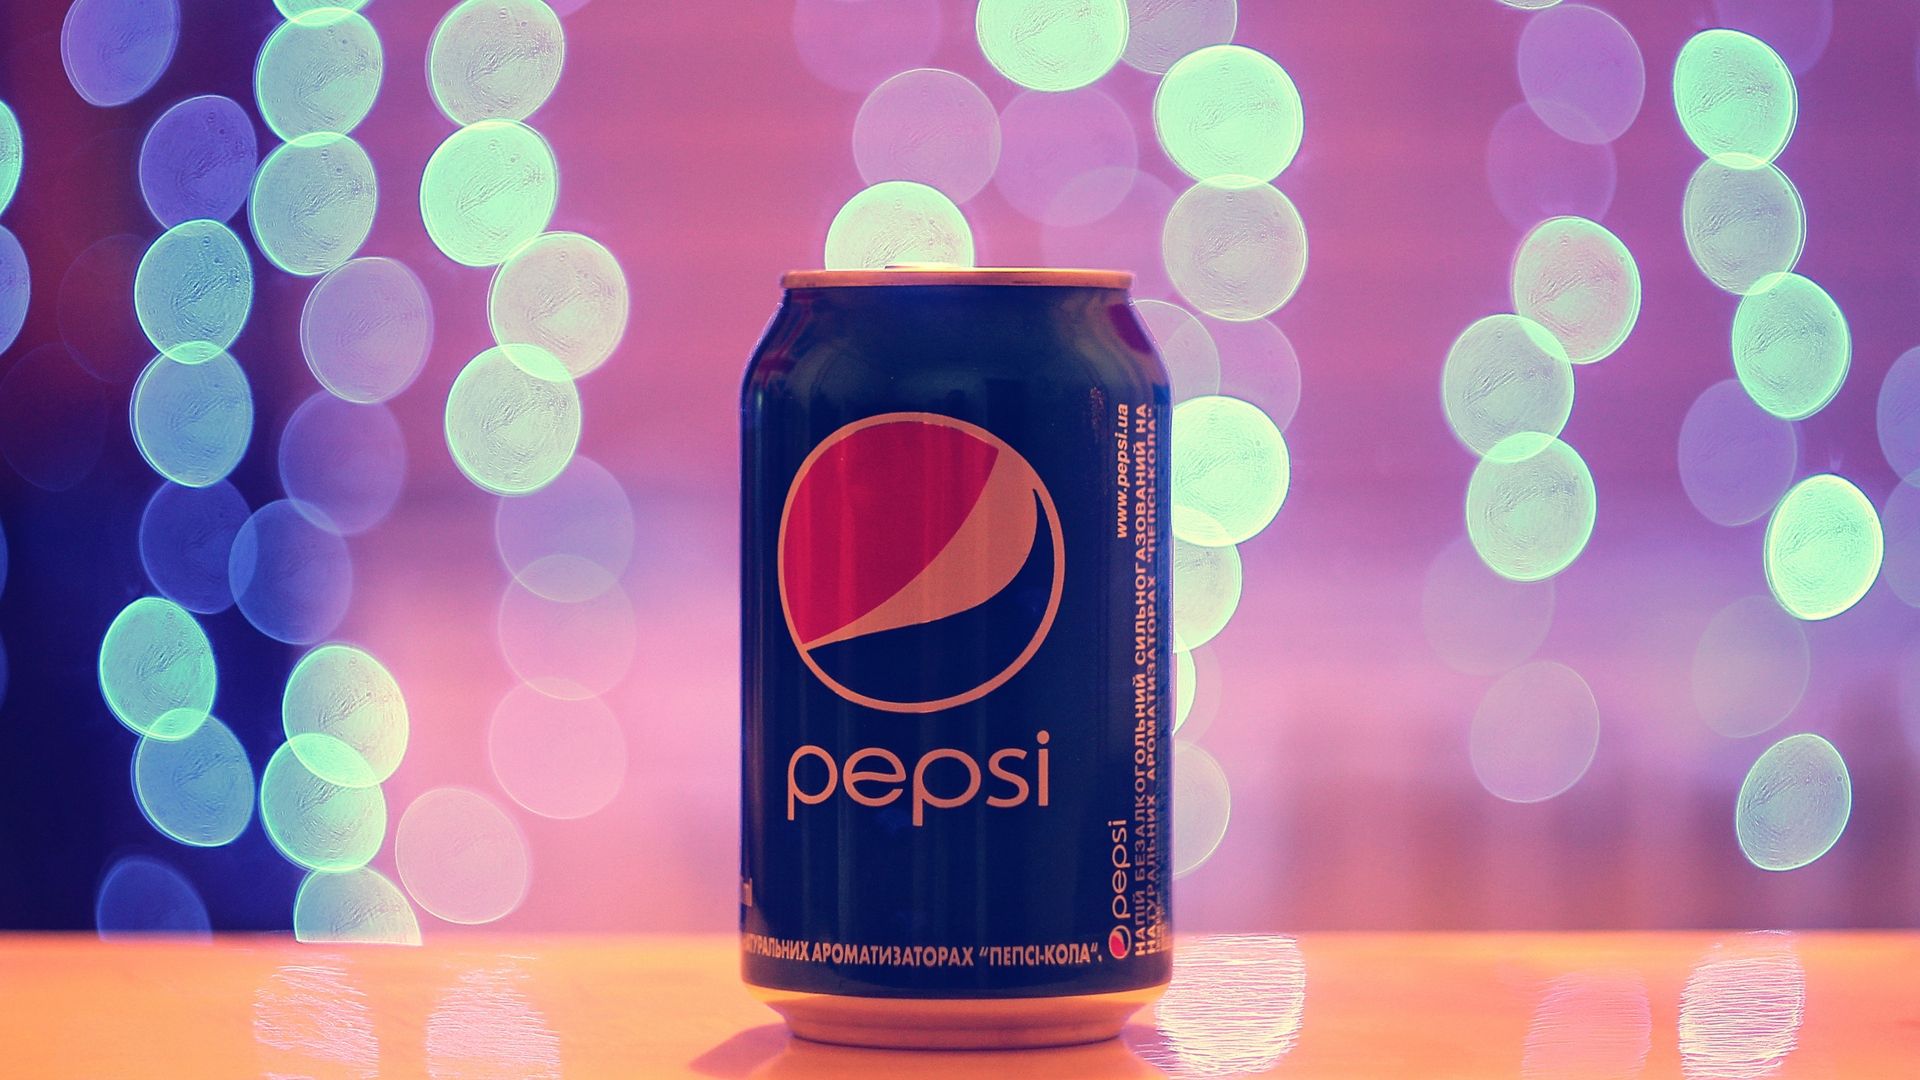 Pepsi Soft Drink with Bokeh Background Wallpaper